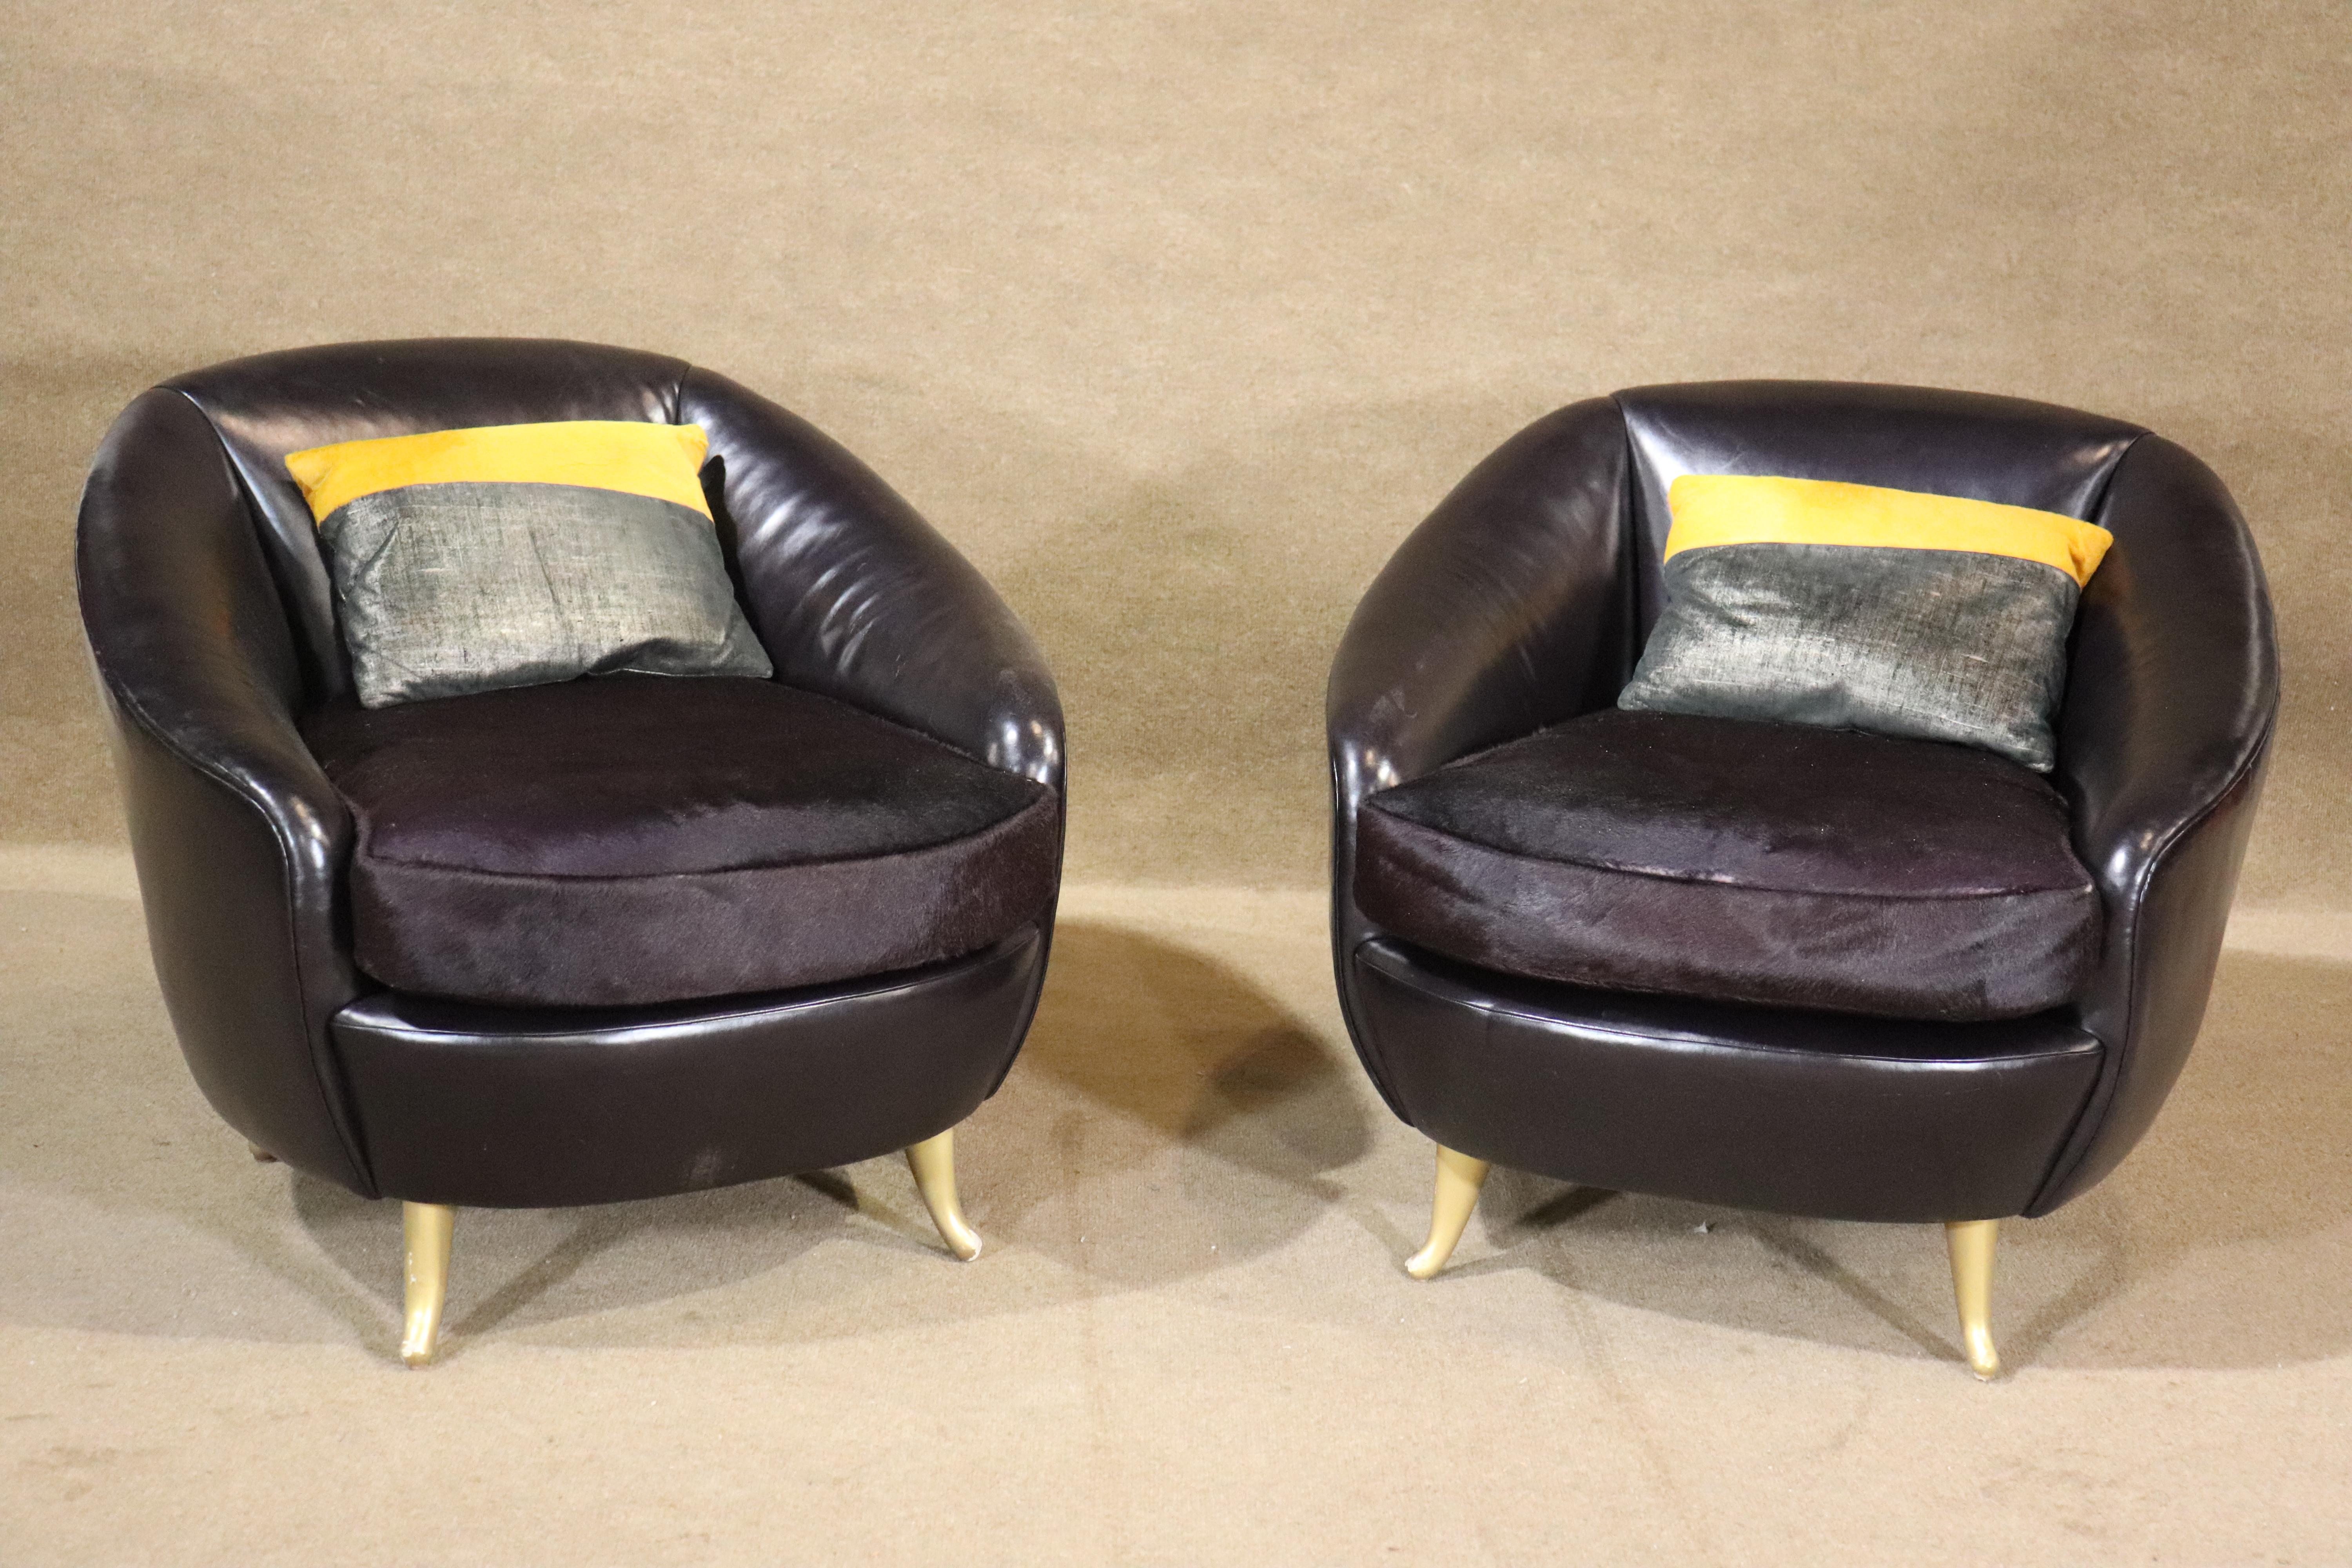 Pair of mid-century style tub chairs in leather and hide. Accented with low brass legs. Round barrel back shape frame in leather with matching color hide seats. 
Please confirm location NY or NJ